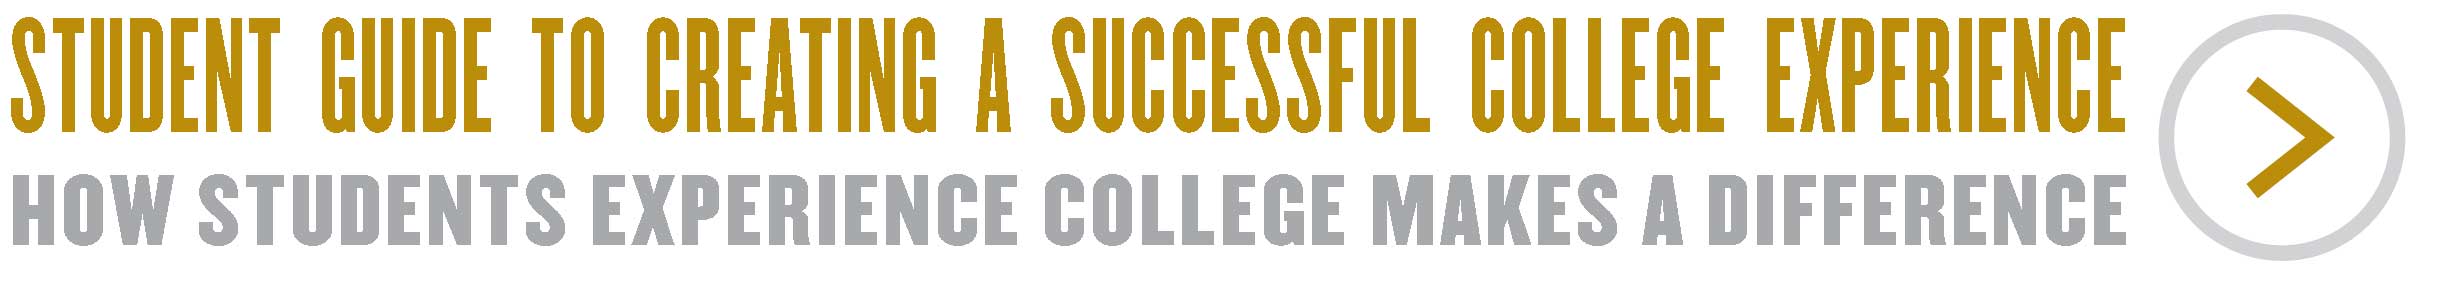 Student Guide to Creating a Successful College Experience - How Students Experience College Makes a Difference